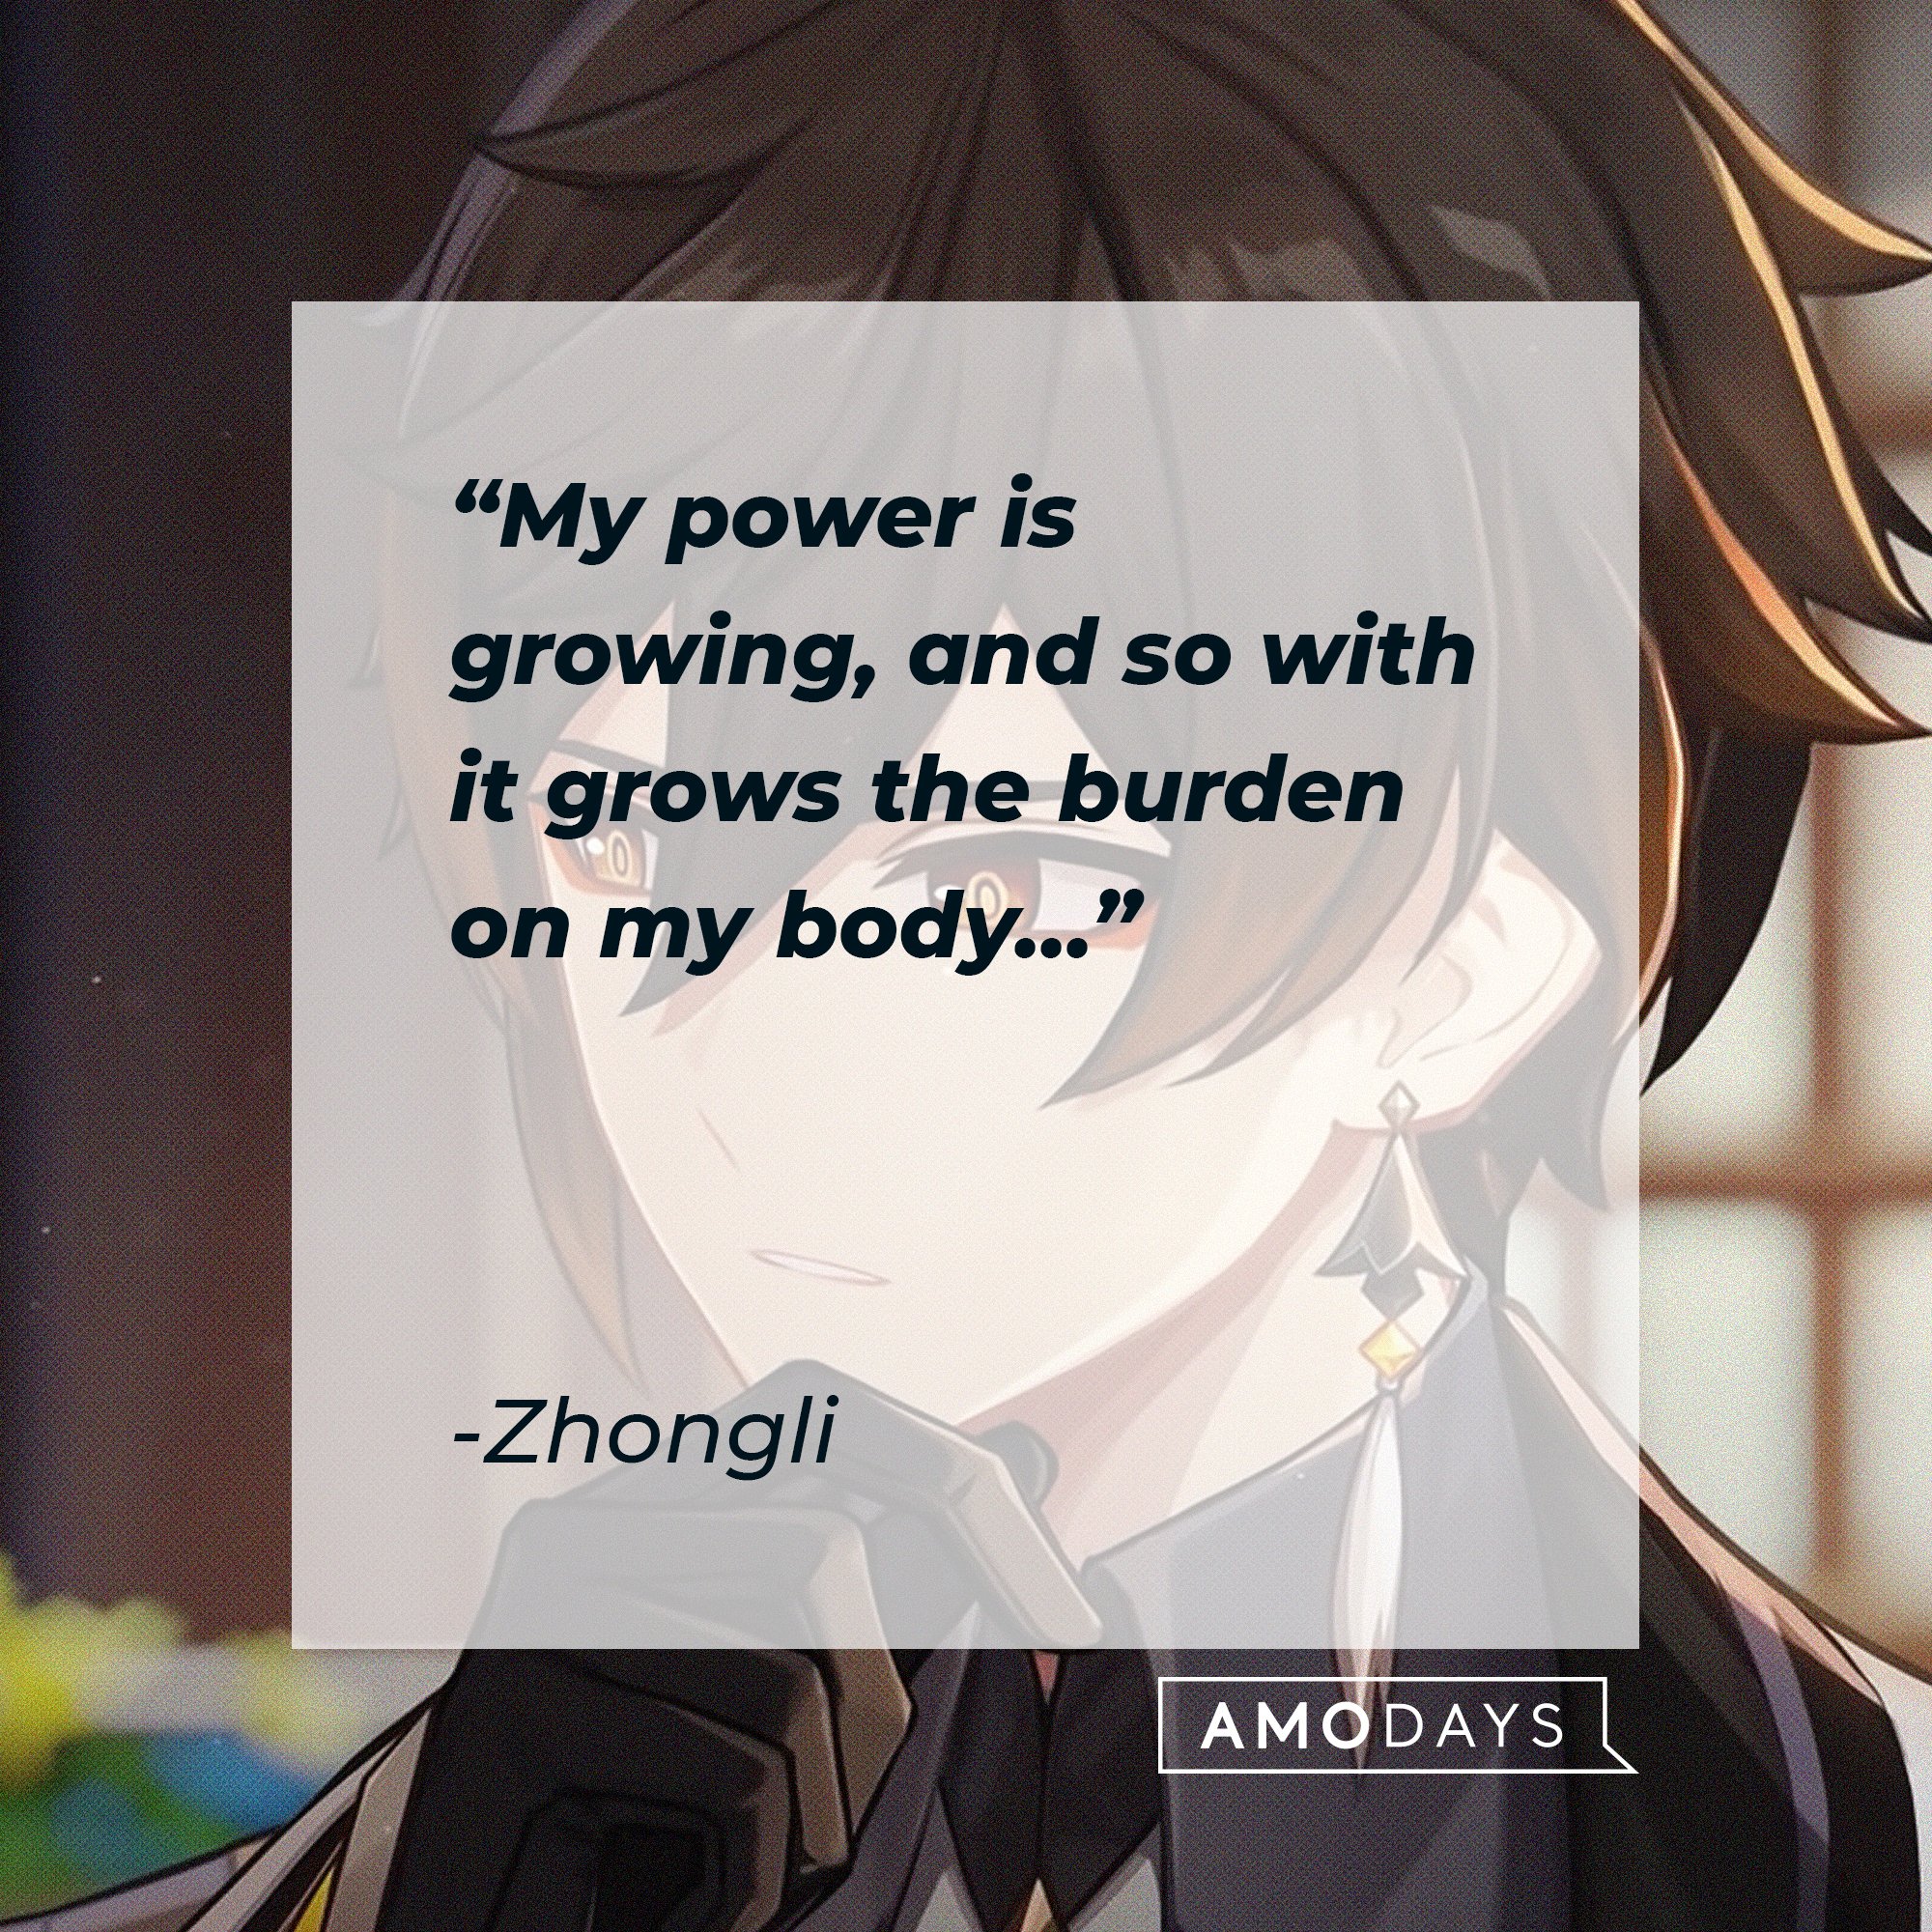 Zhongli’s quote: "My power is growing, and so with it grows the burden on my body…" | Image: AmoDays